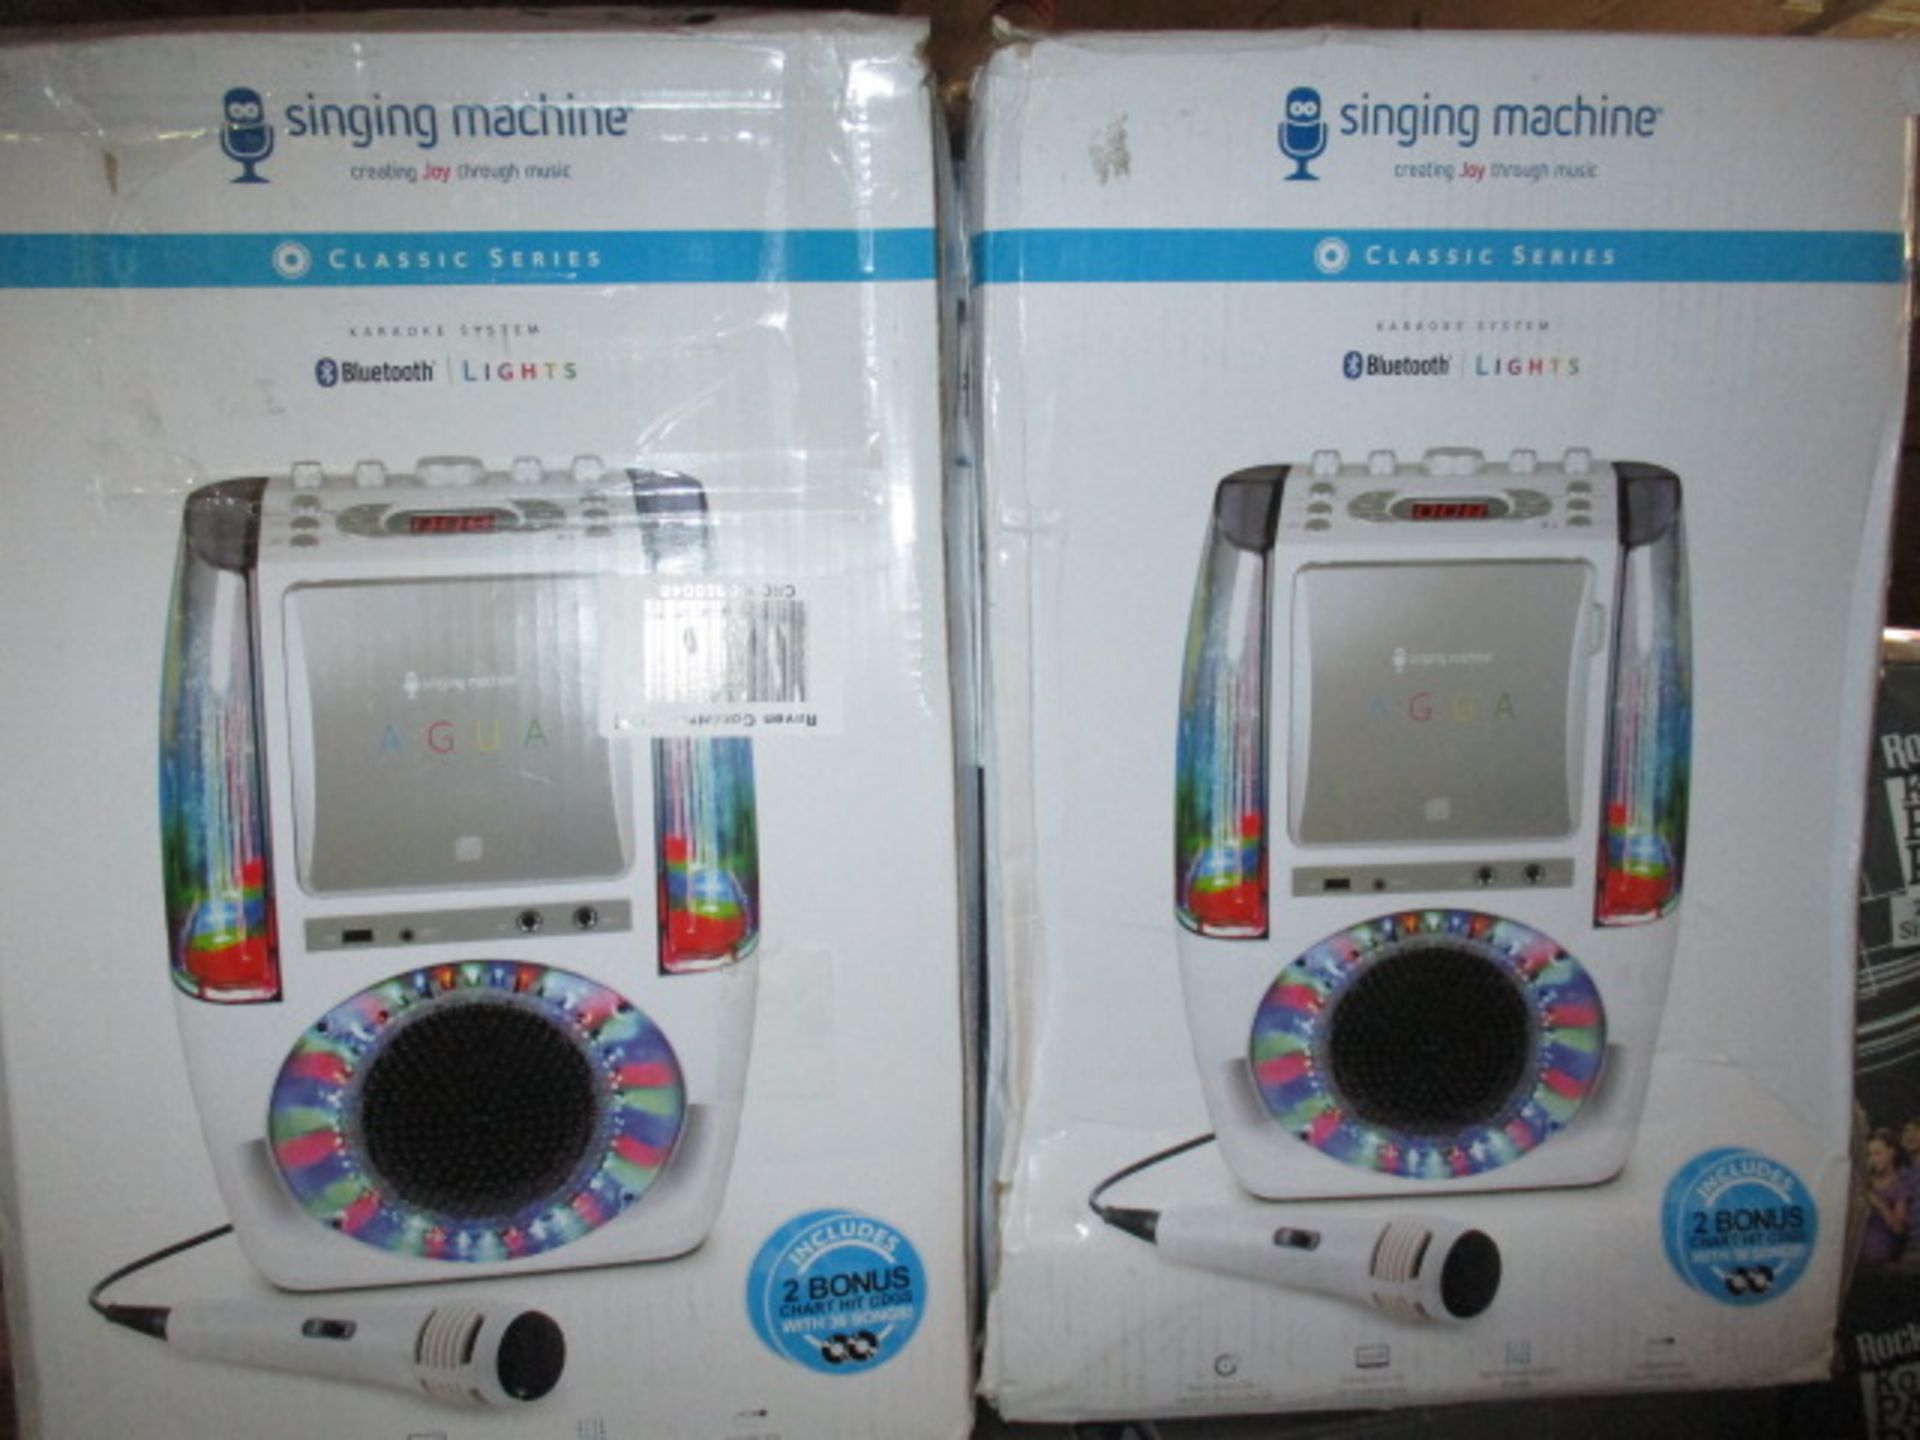 1pc slected from stock at random - Agua Singing Karaoke machine -light and water show return will be